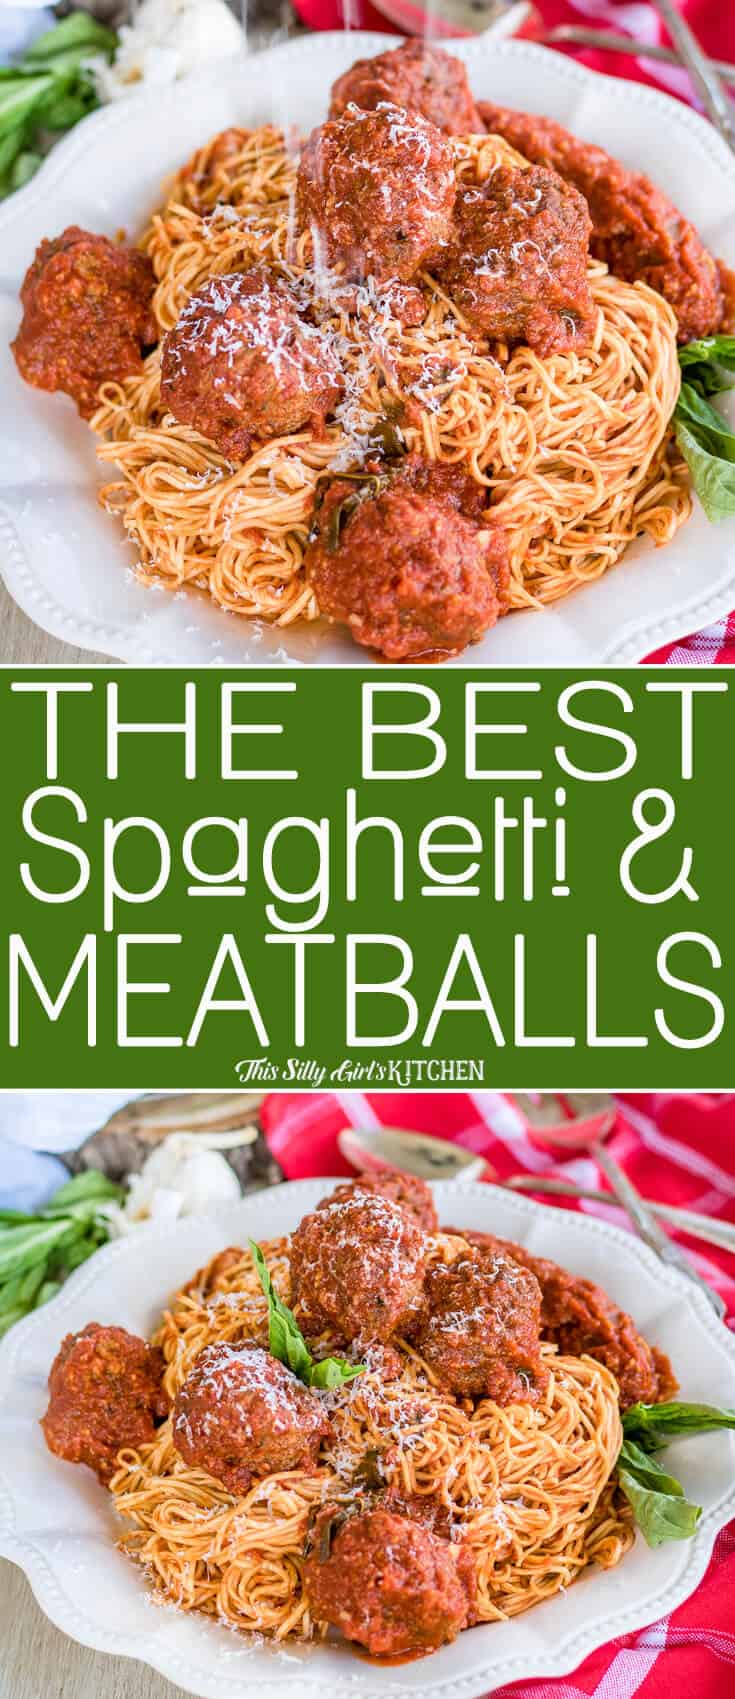 Spaghetti and Meatballs on white plate Pinterest Image